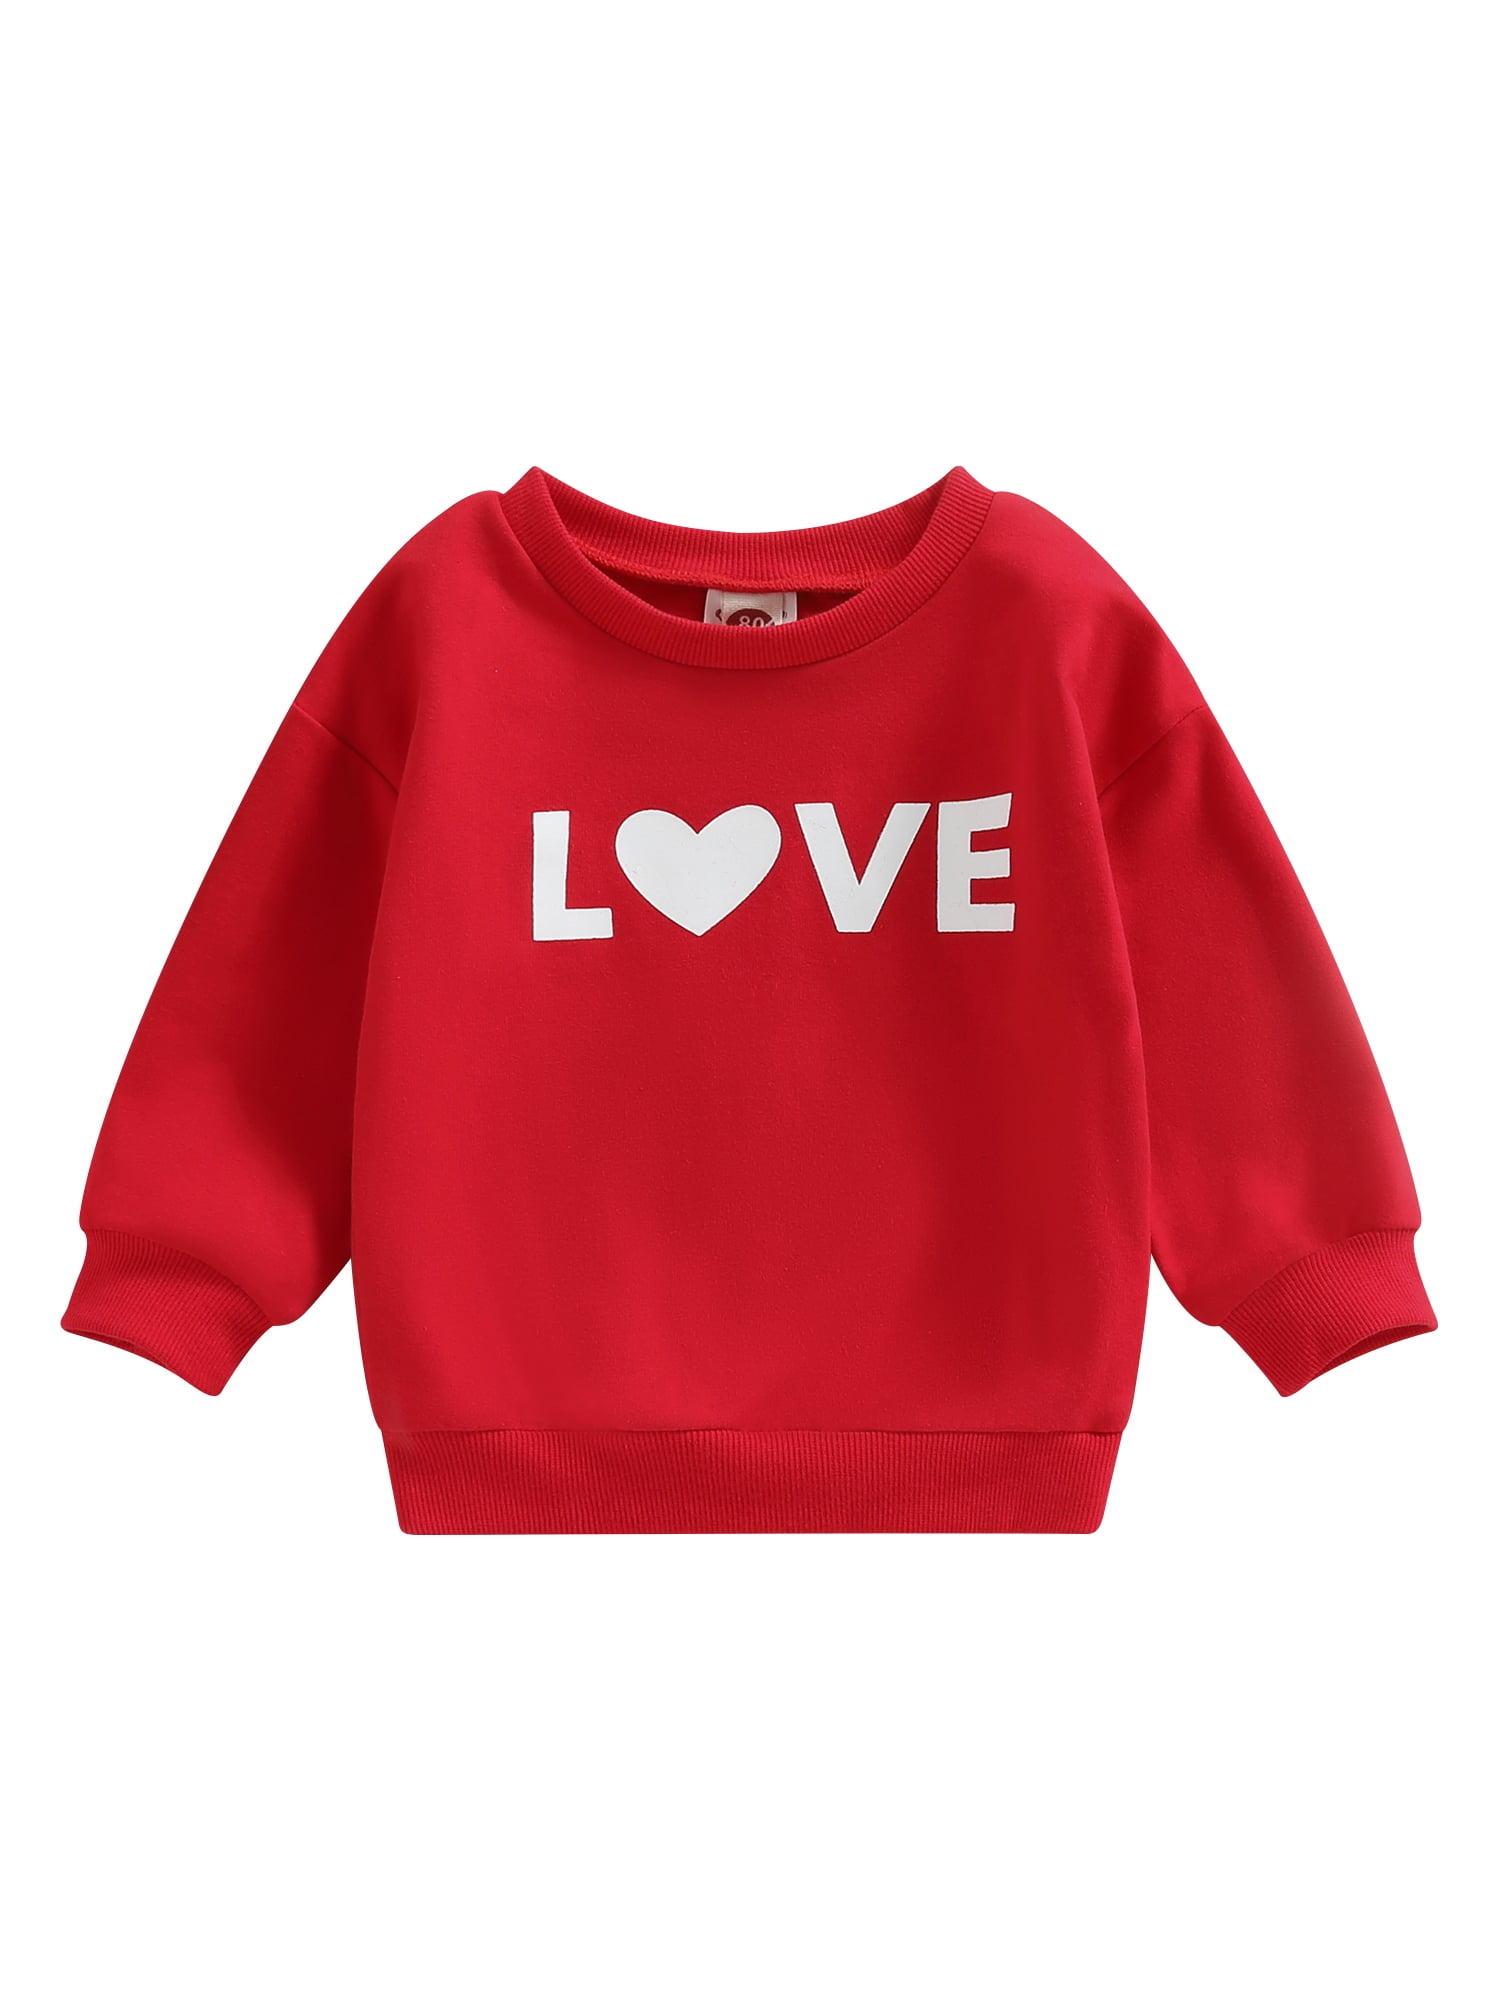 Aunavey Toddler Baby Boys Girls Valentine\'s Day Sweatshirt MR. Steal Your  Heart Pullover Spring Clothes Top